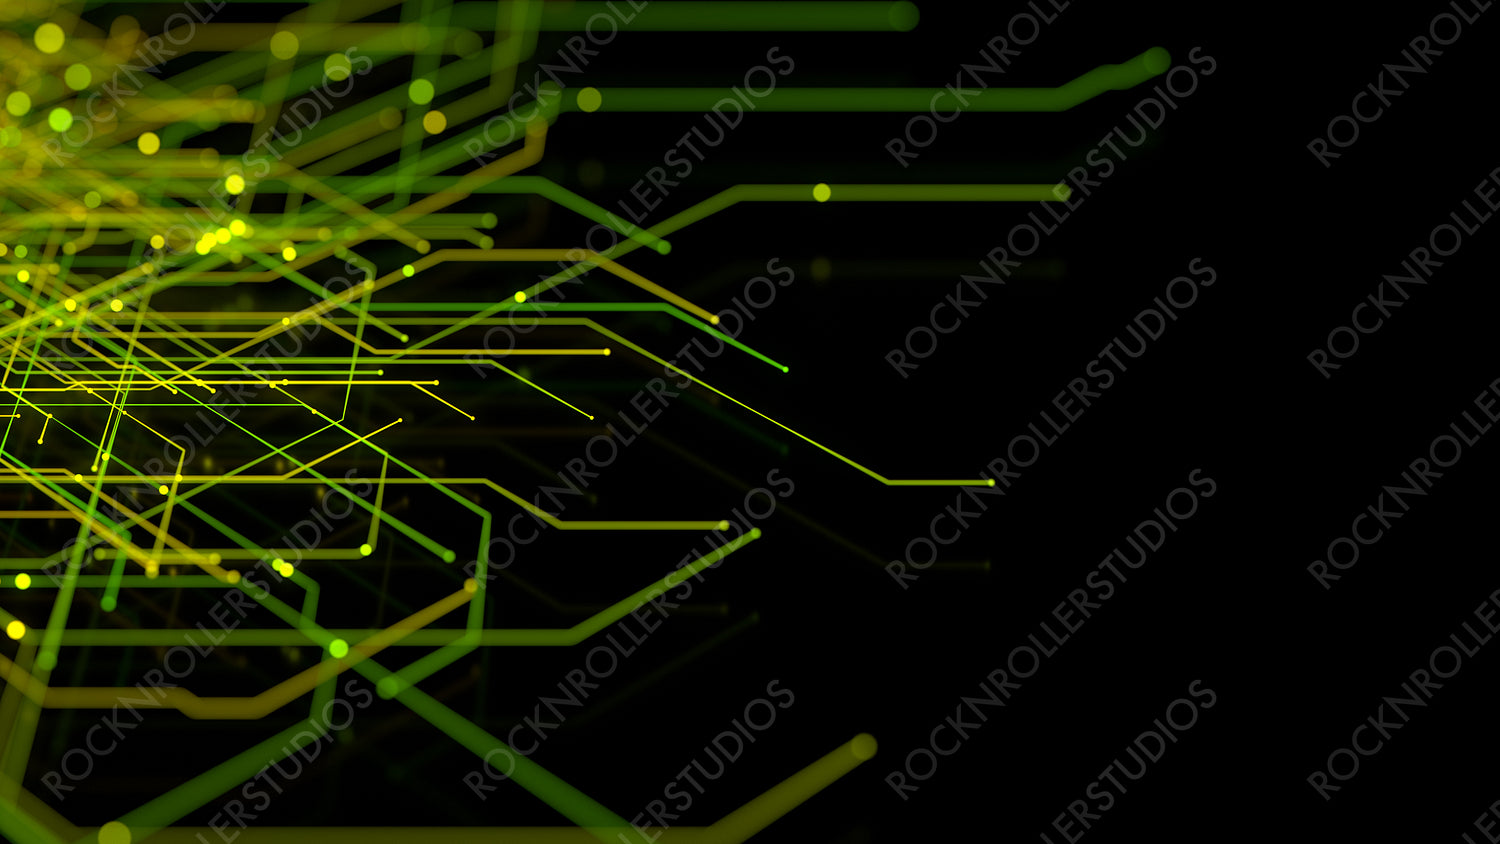 Green and Yellow Digital Lines form a Futuristic High-Tech Grid. Connectivity Concept.